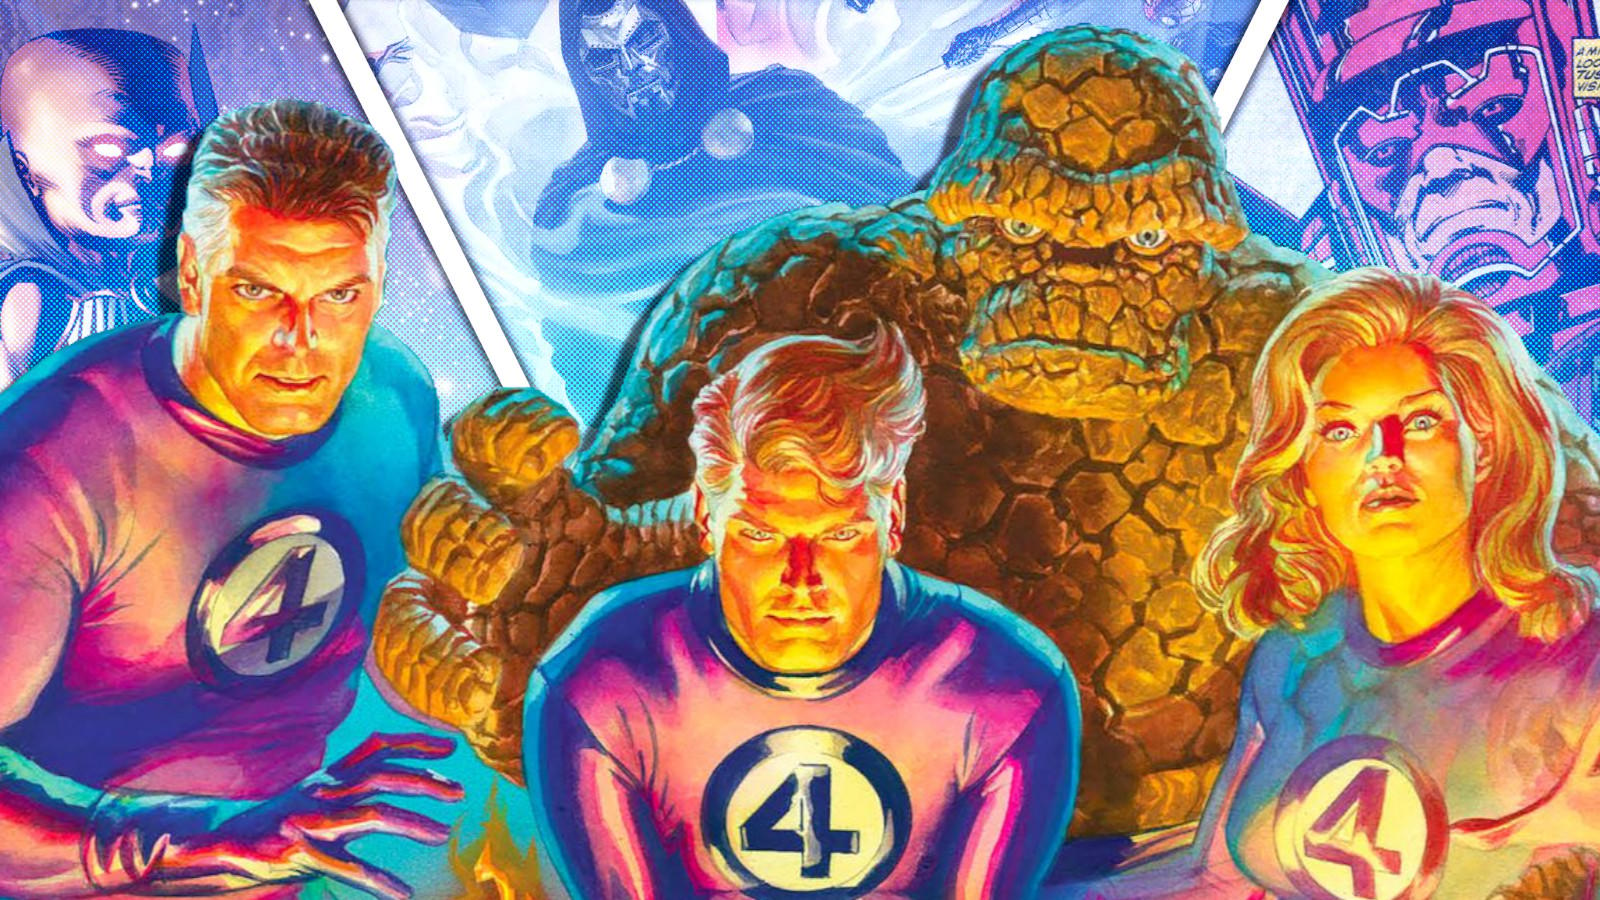 The Fantastic Four with with The Watcher, Doctor Doom, and Galactus